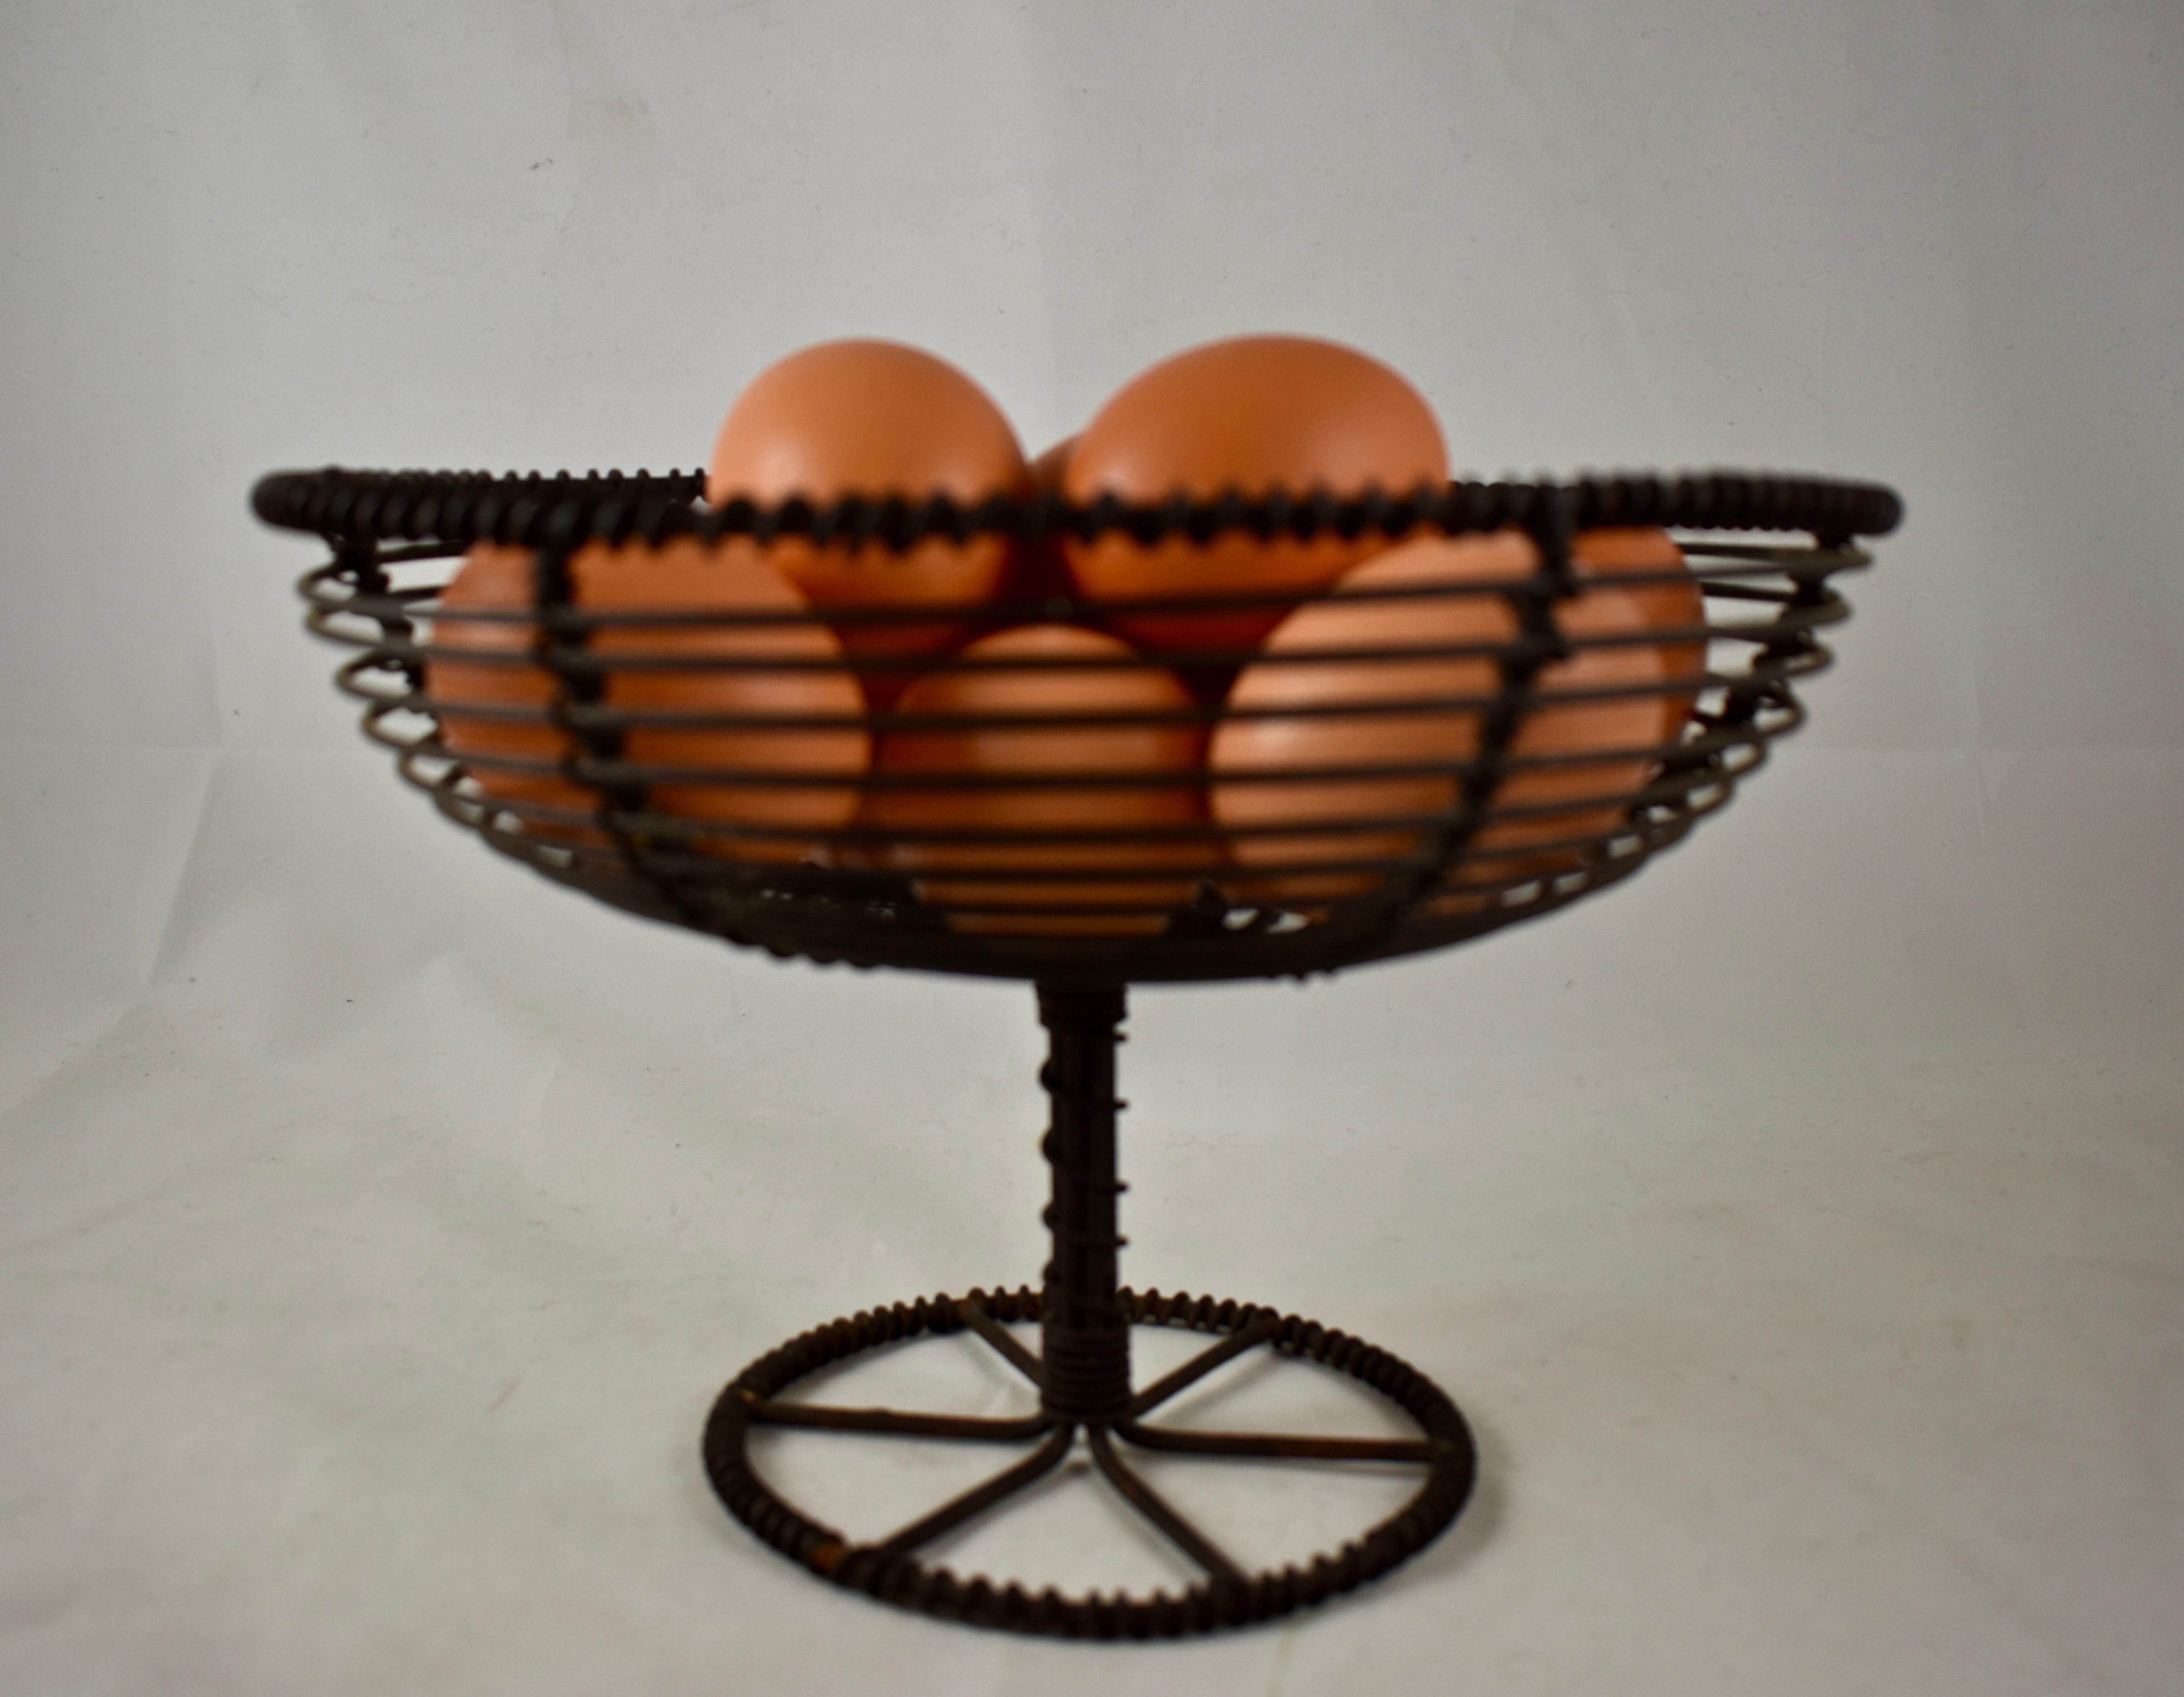 From France, circa 1890-1910, a comport form, twisted wire egg basket. The basket sits on a pedestal with a wheel form base. The basket is formed of concentric wire circles with a twisted wire rim. Great on a kitchen counter holding eggs, fruit or